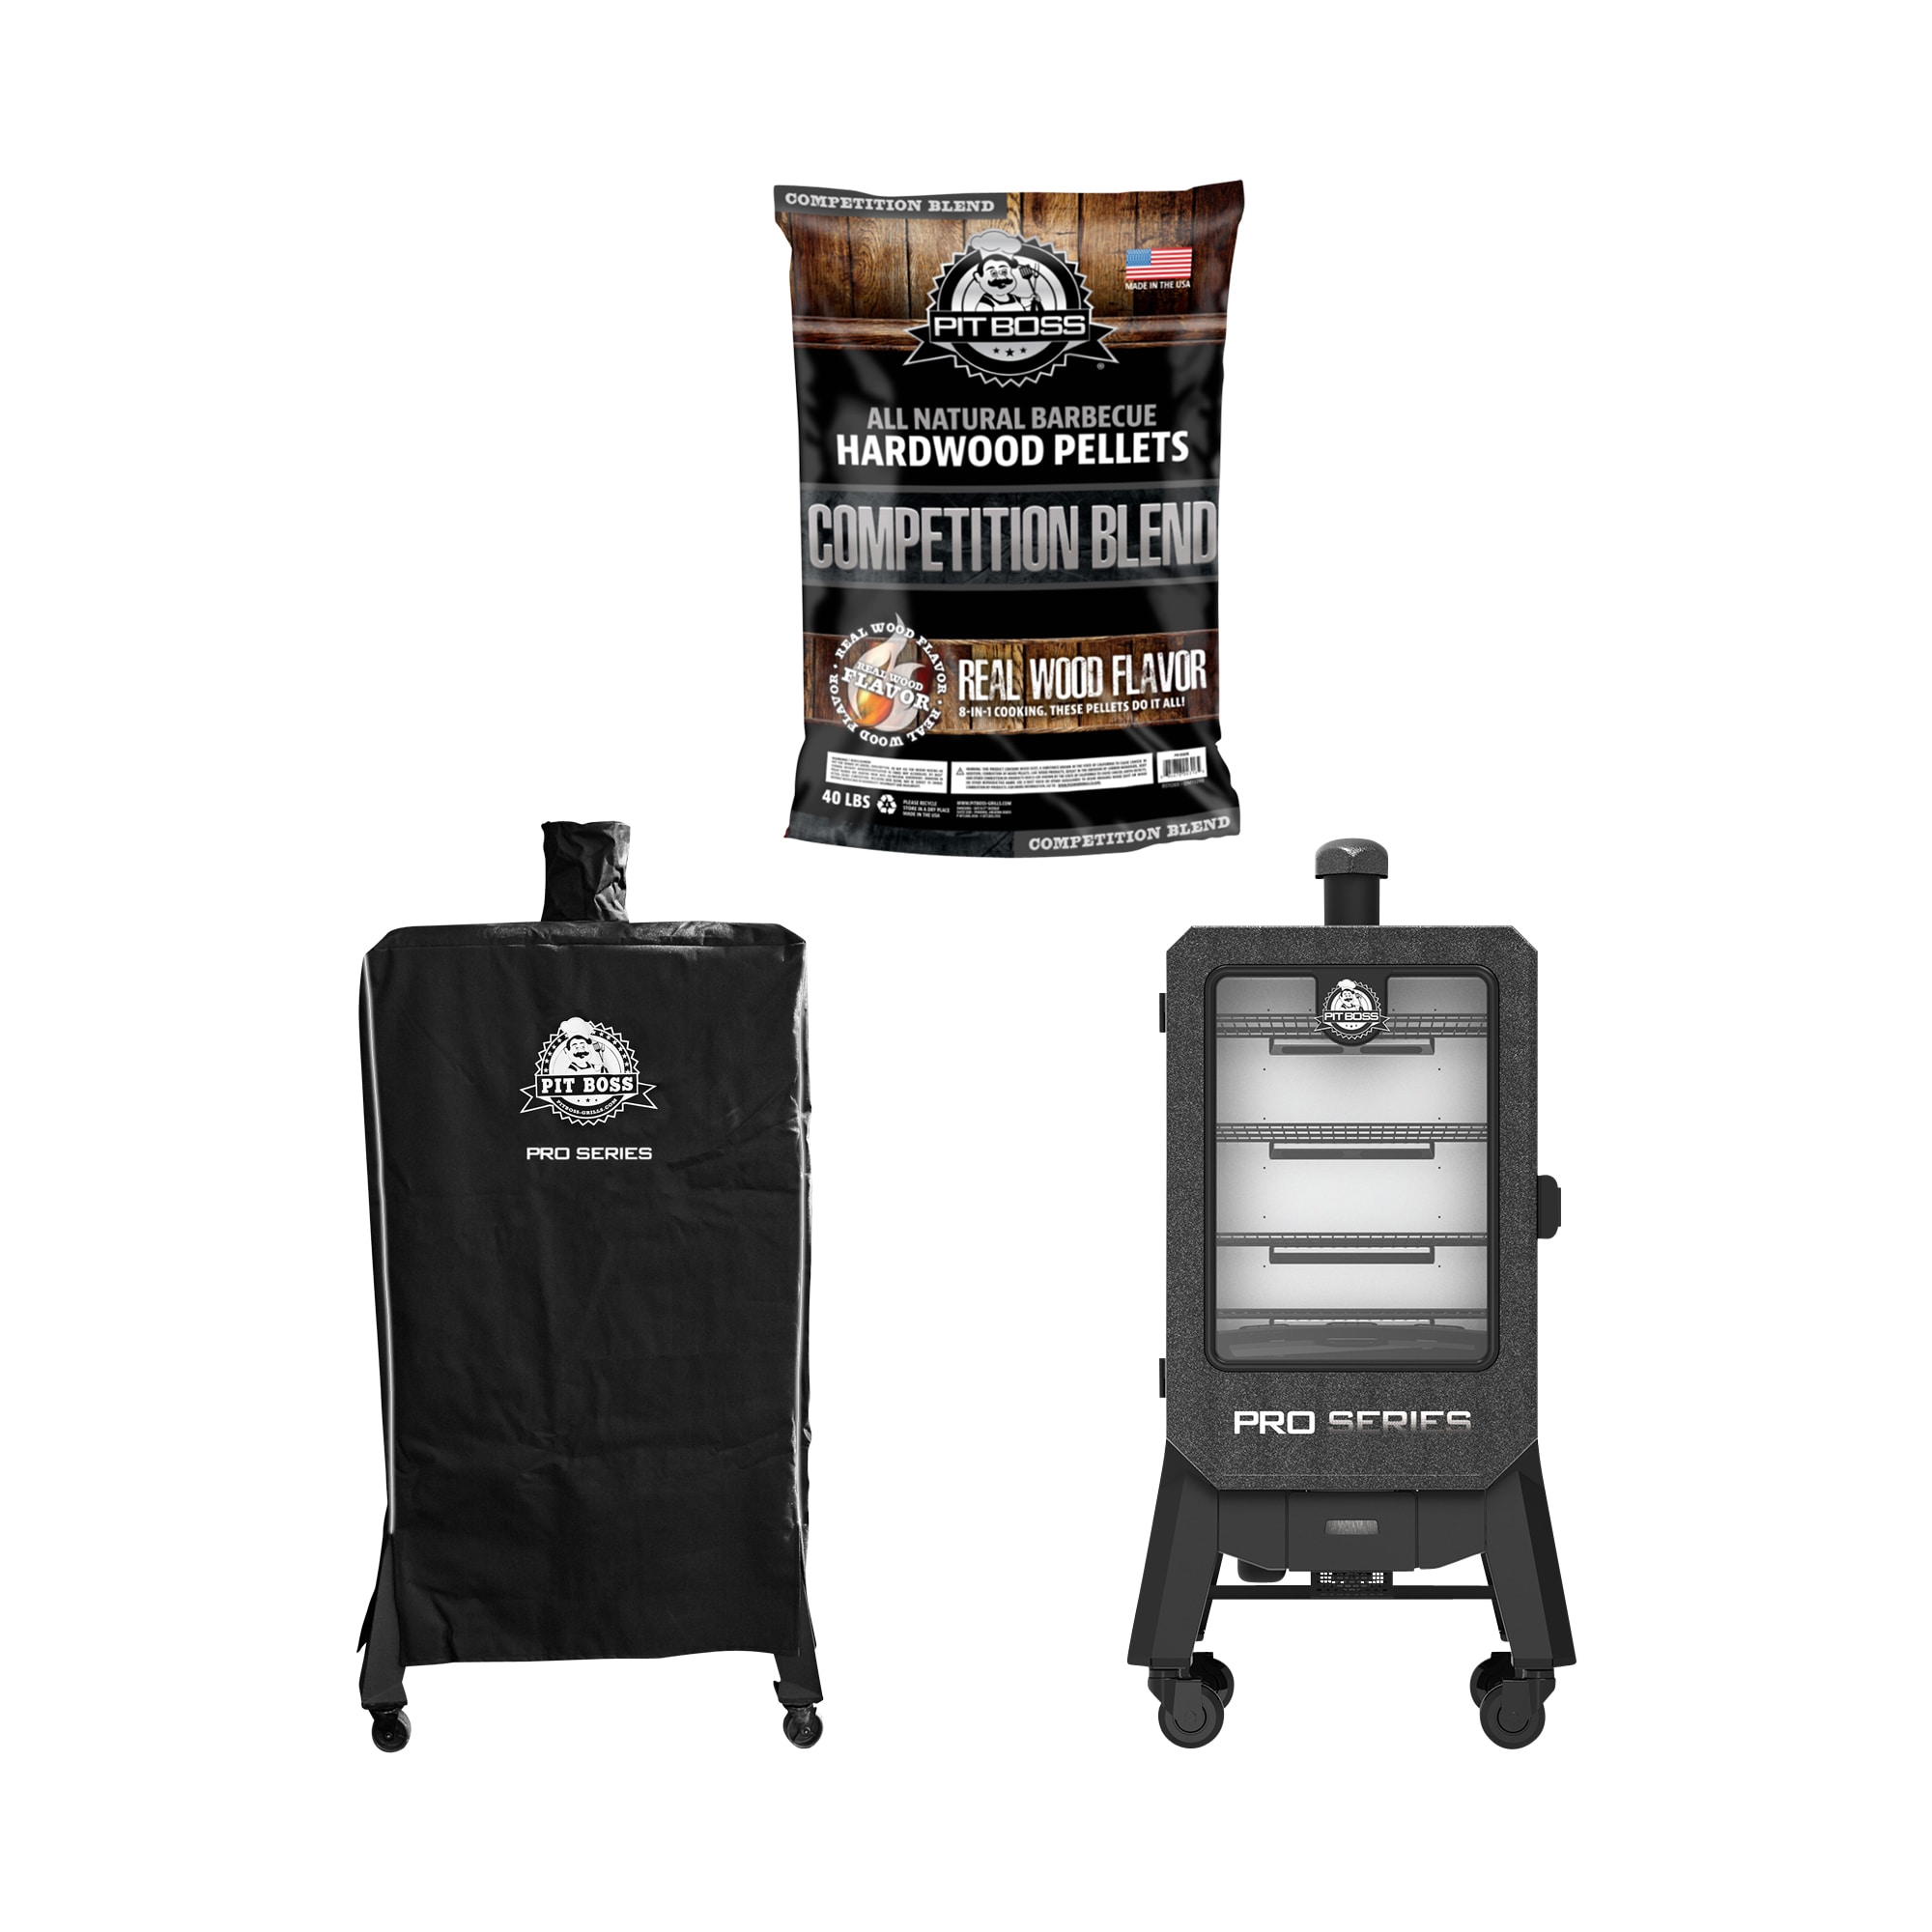 Pit Boss Pro Series 1600 Elite Pellet Grill with Pit Boss Grill Cover &  Grilling Accessories